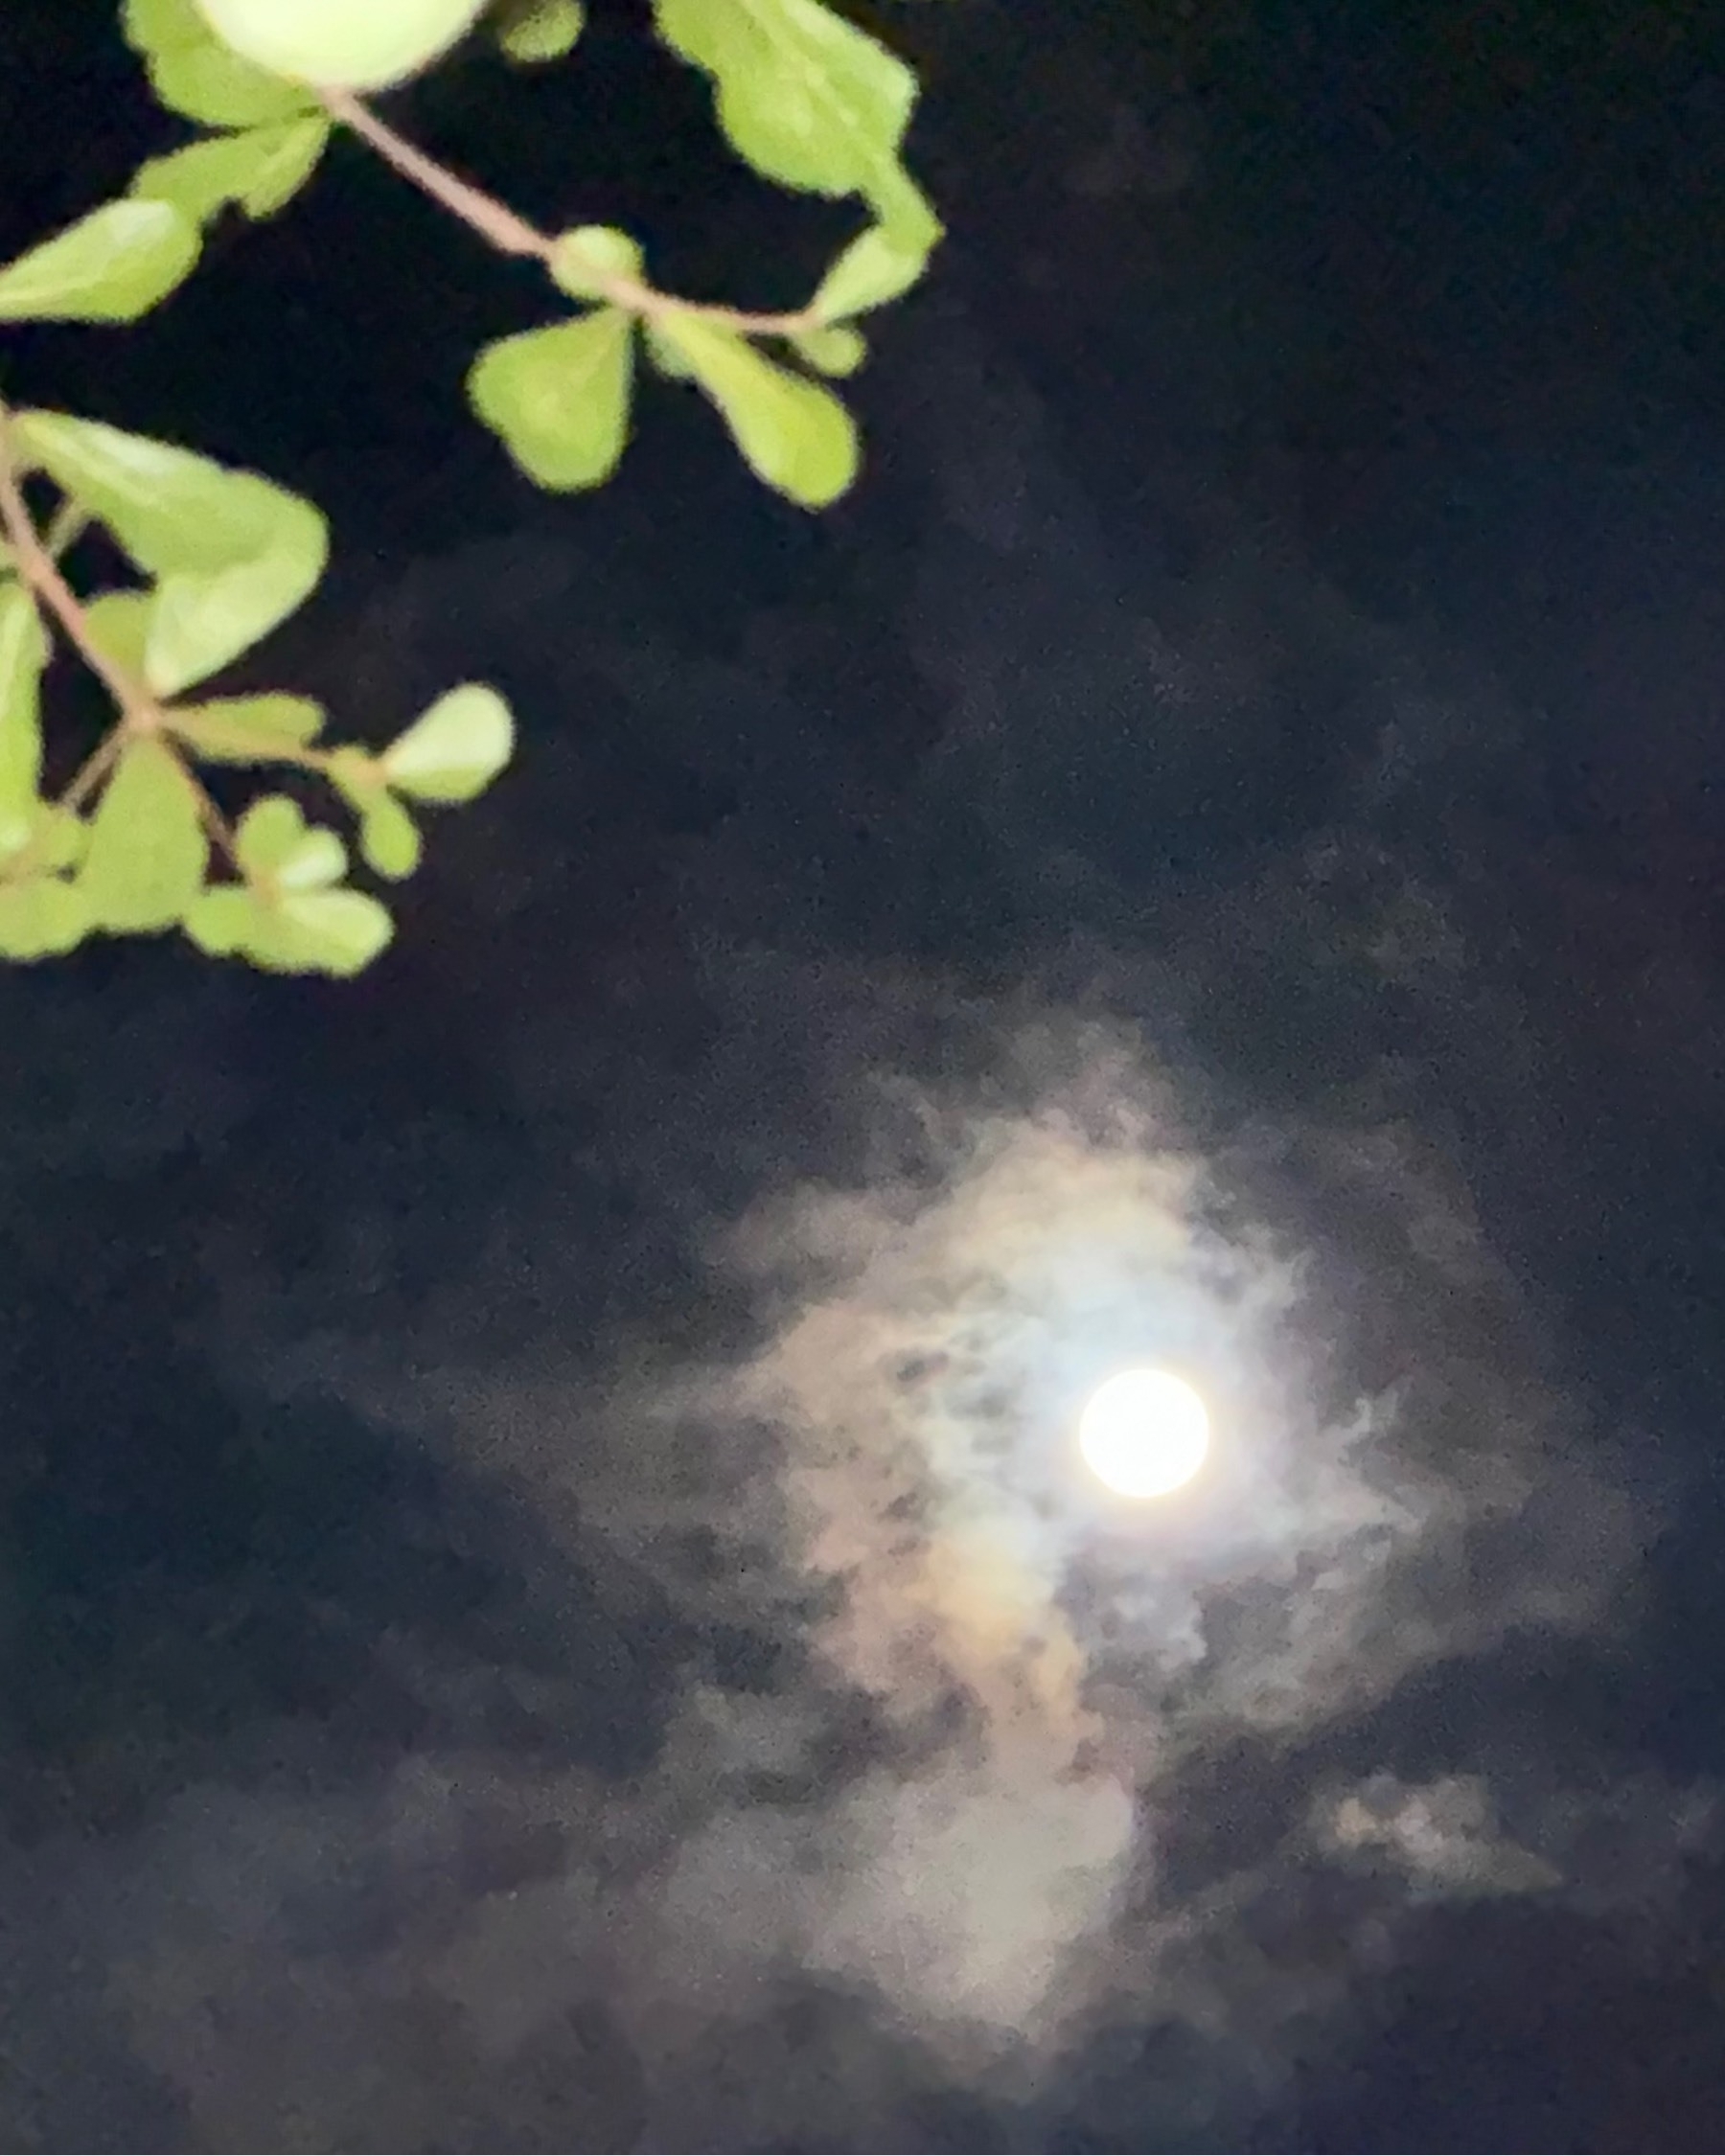 The full moon, surrounded by wisps of cloud, with some leaves of a tree lit up (by flash) in the foreground